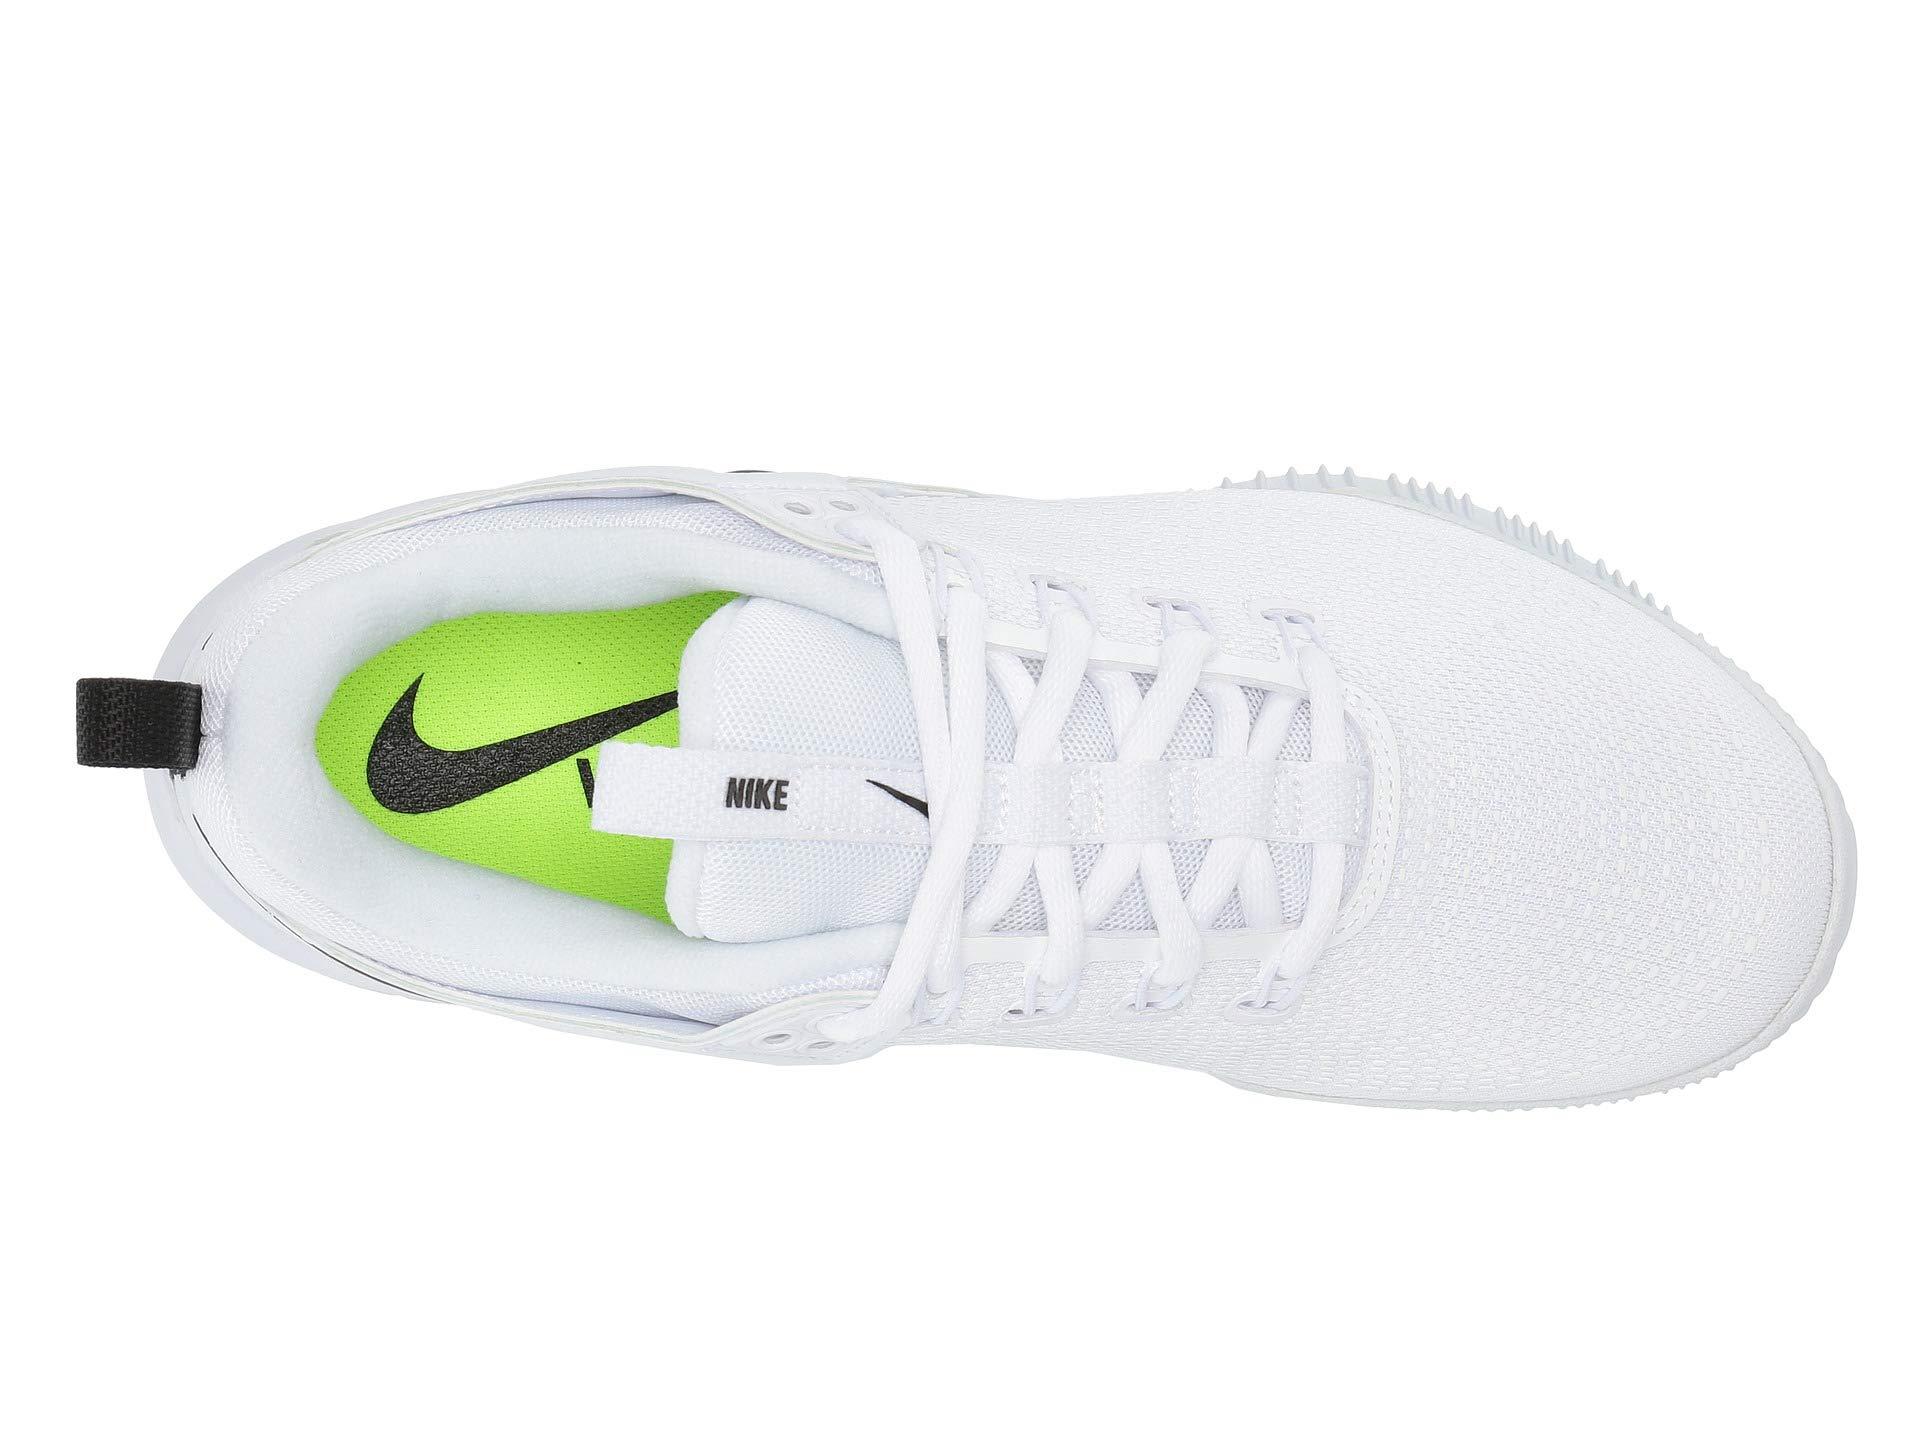 Nike Rubber Zoom Hyperace 2 - Volleyball Shoes in White,Black (White) | Lyst